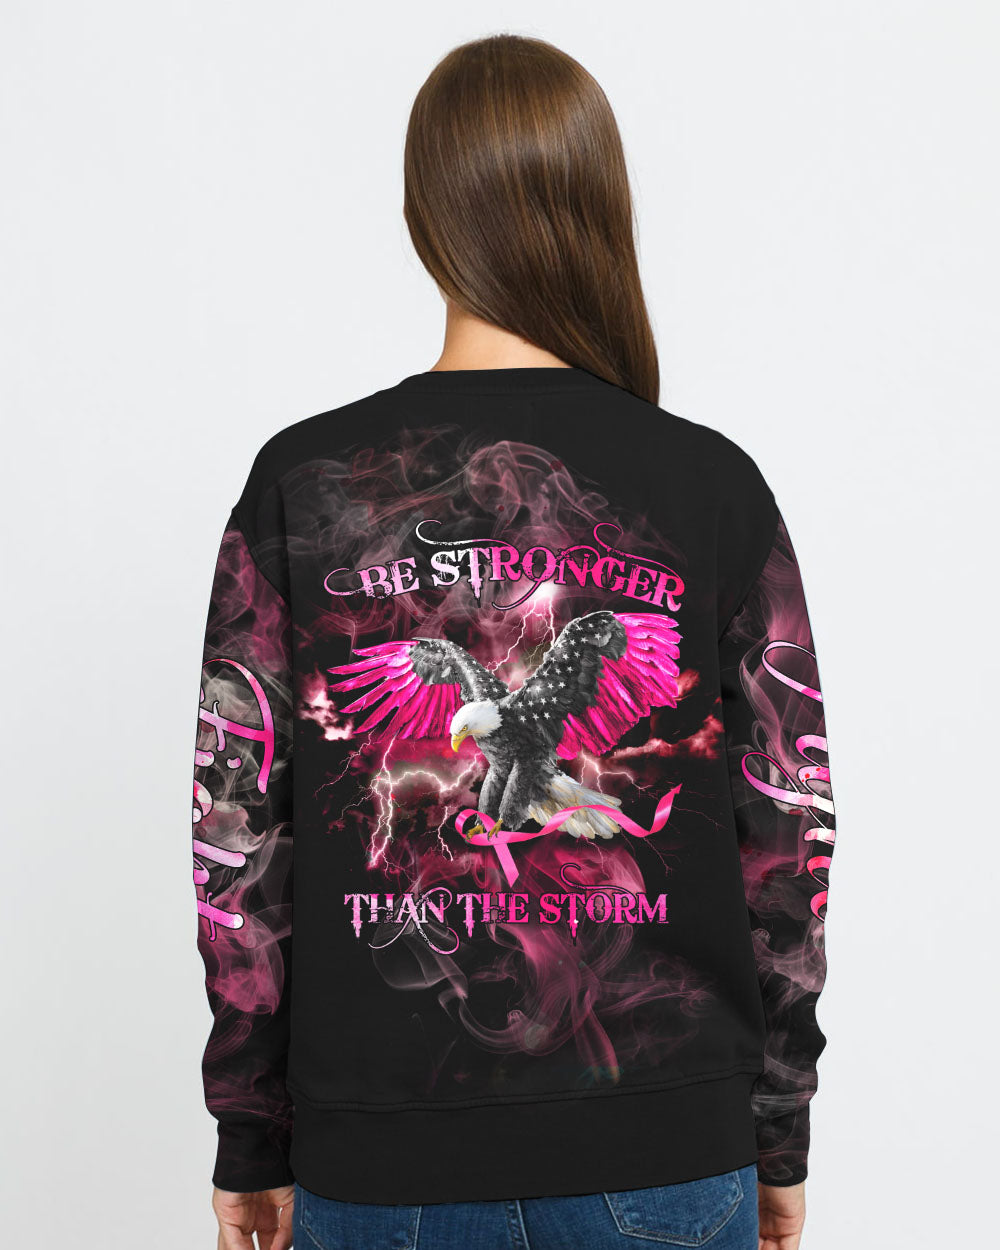 Be Stronger Than The Storm Eagle Pink Smoke Women's Breast Cancer Awareness Sweatshirt